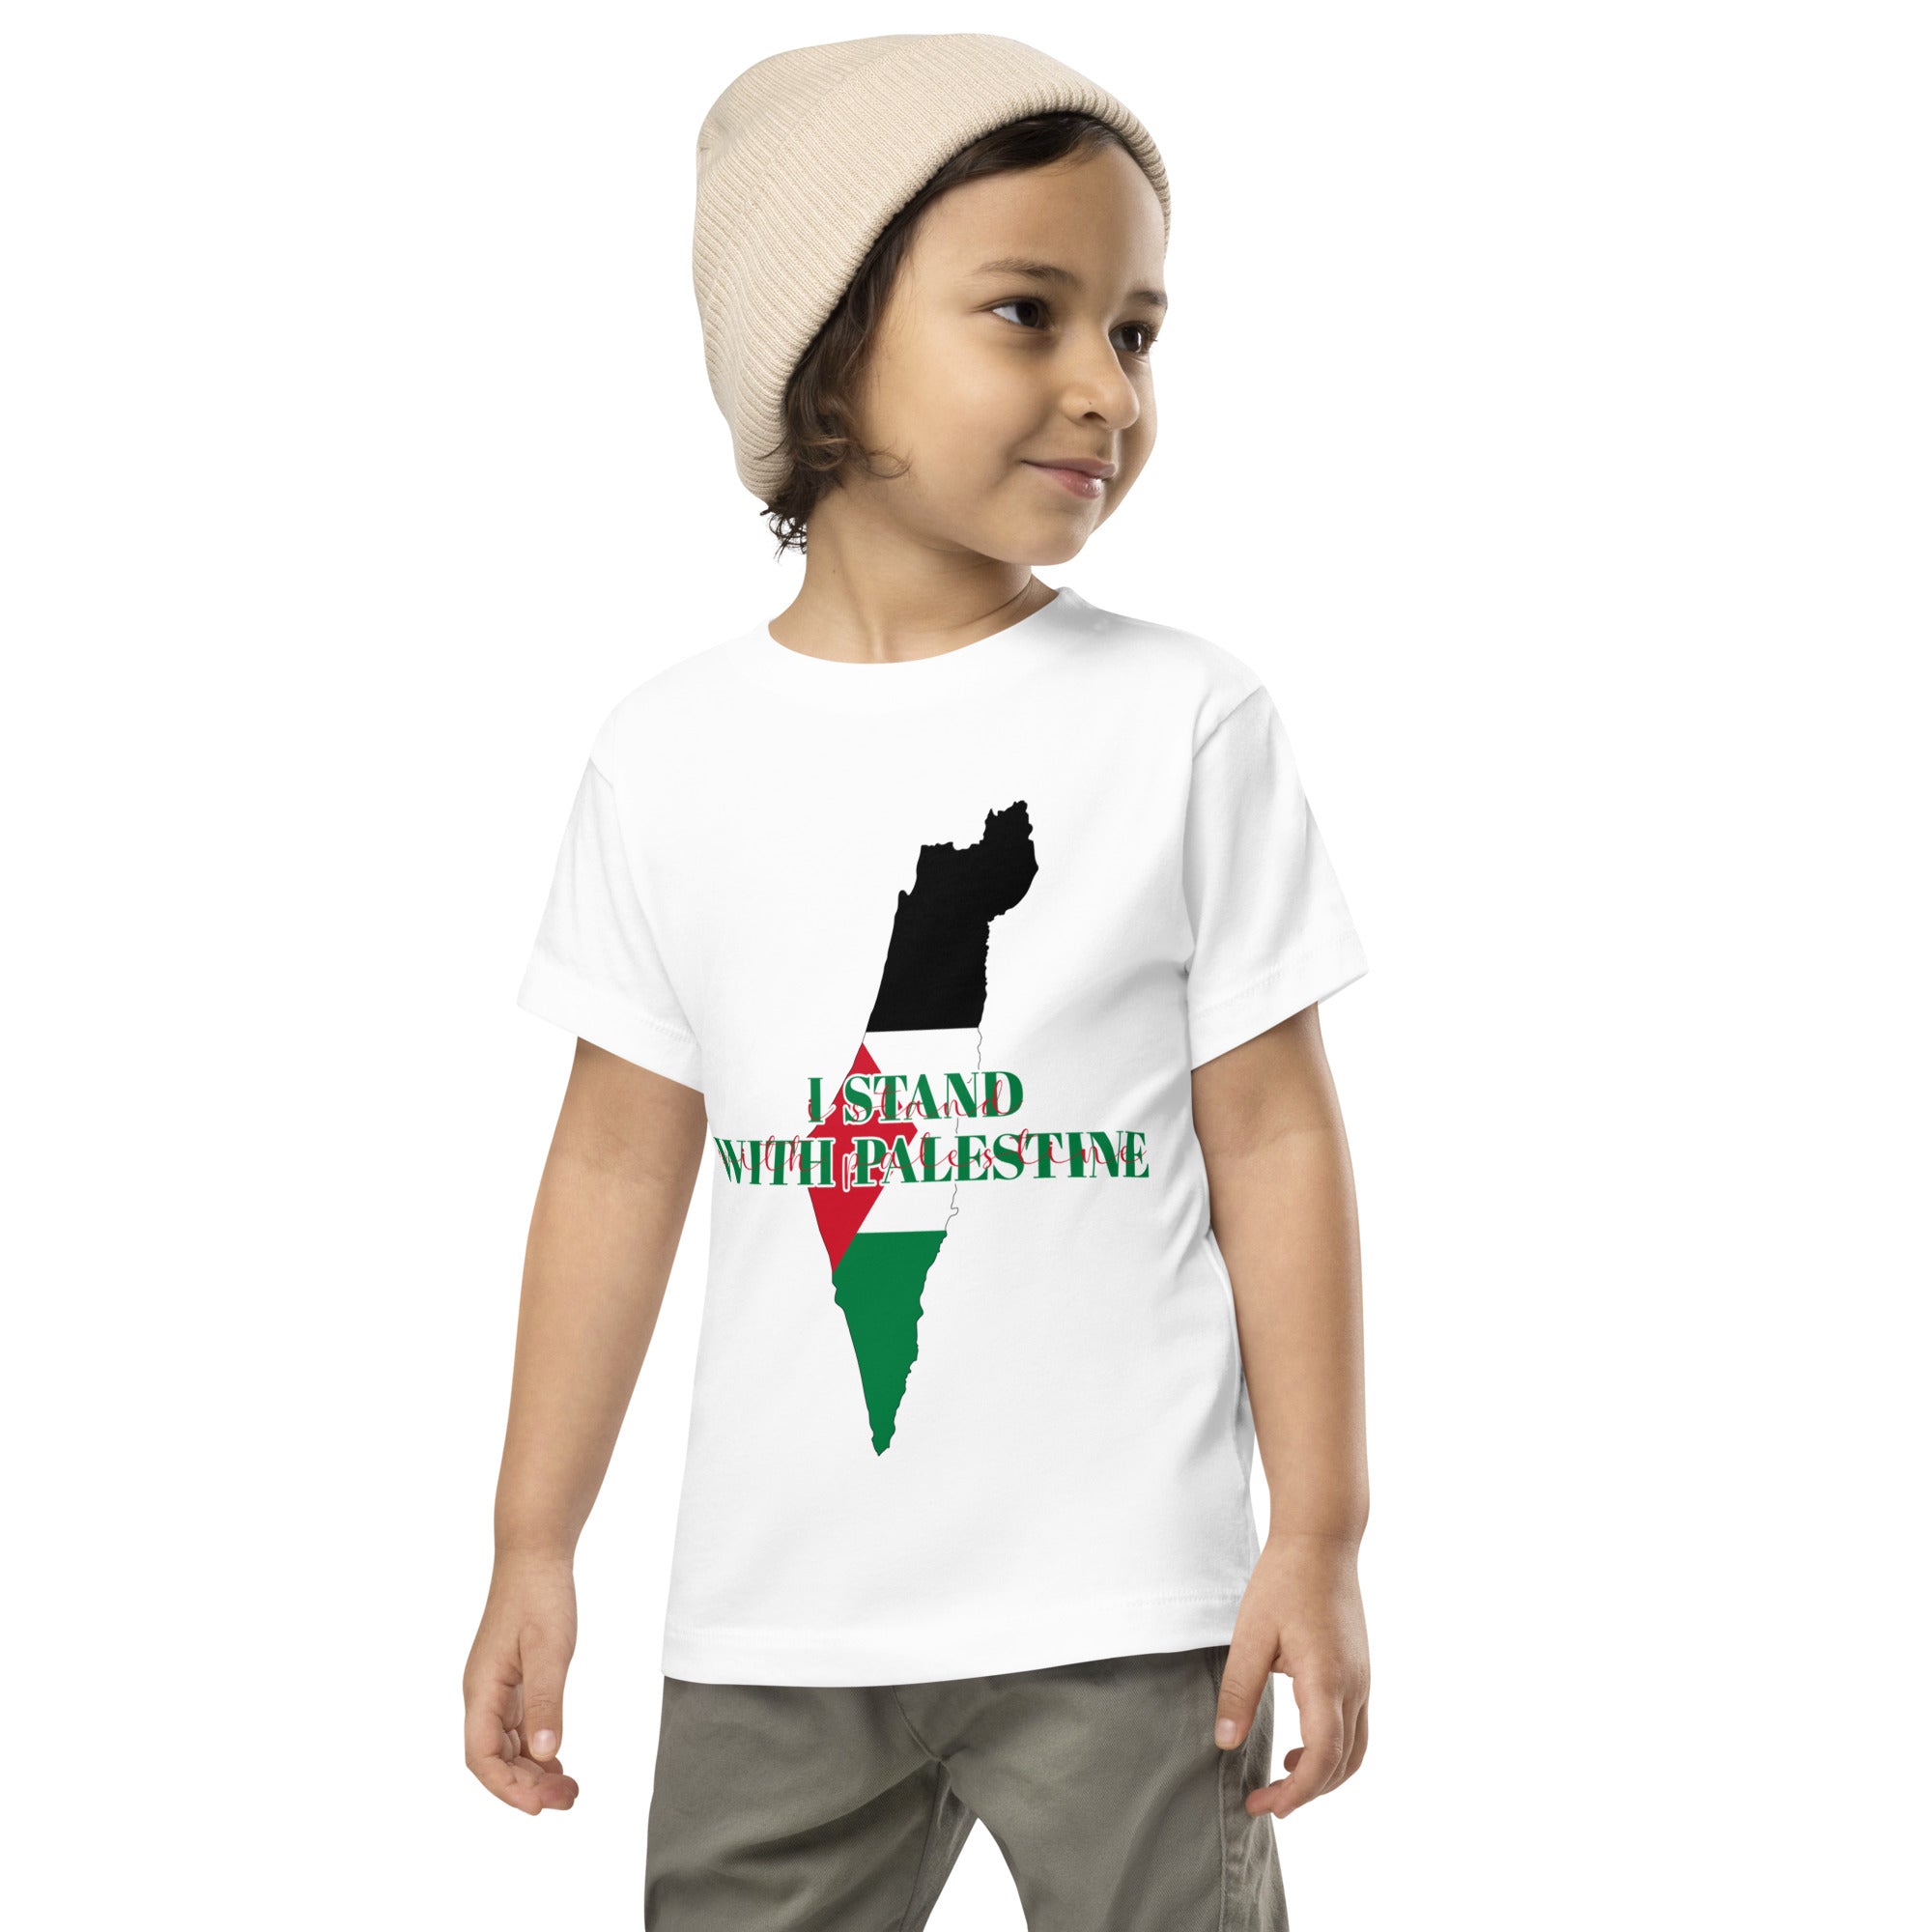 I Stand With Palestine Kids T-Shirt Palestine Map End Israeli Occupation Support Palestine Freedom Ghaza Protest Kids T-Shirt